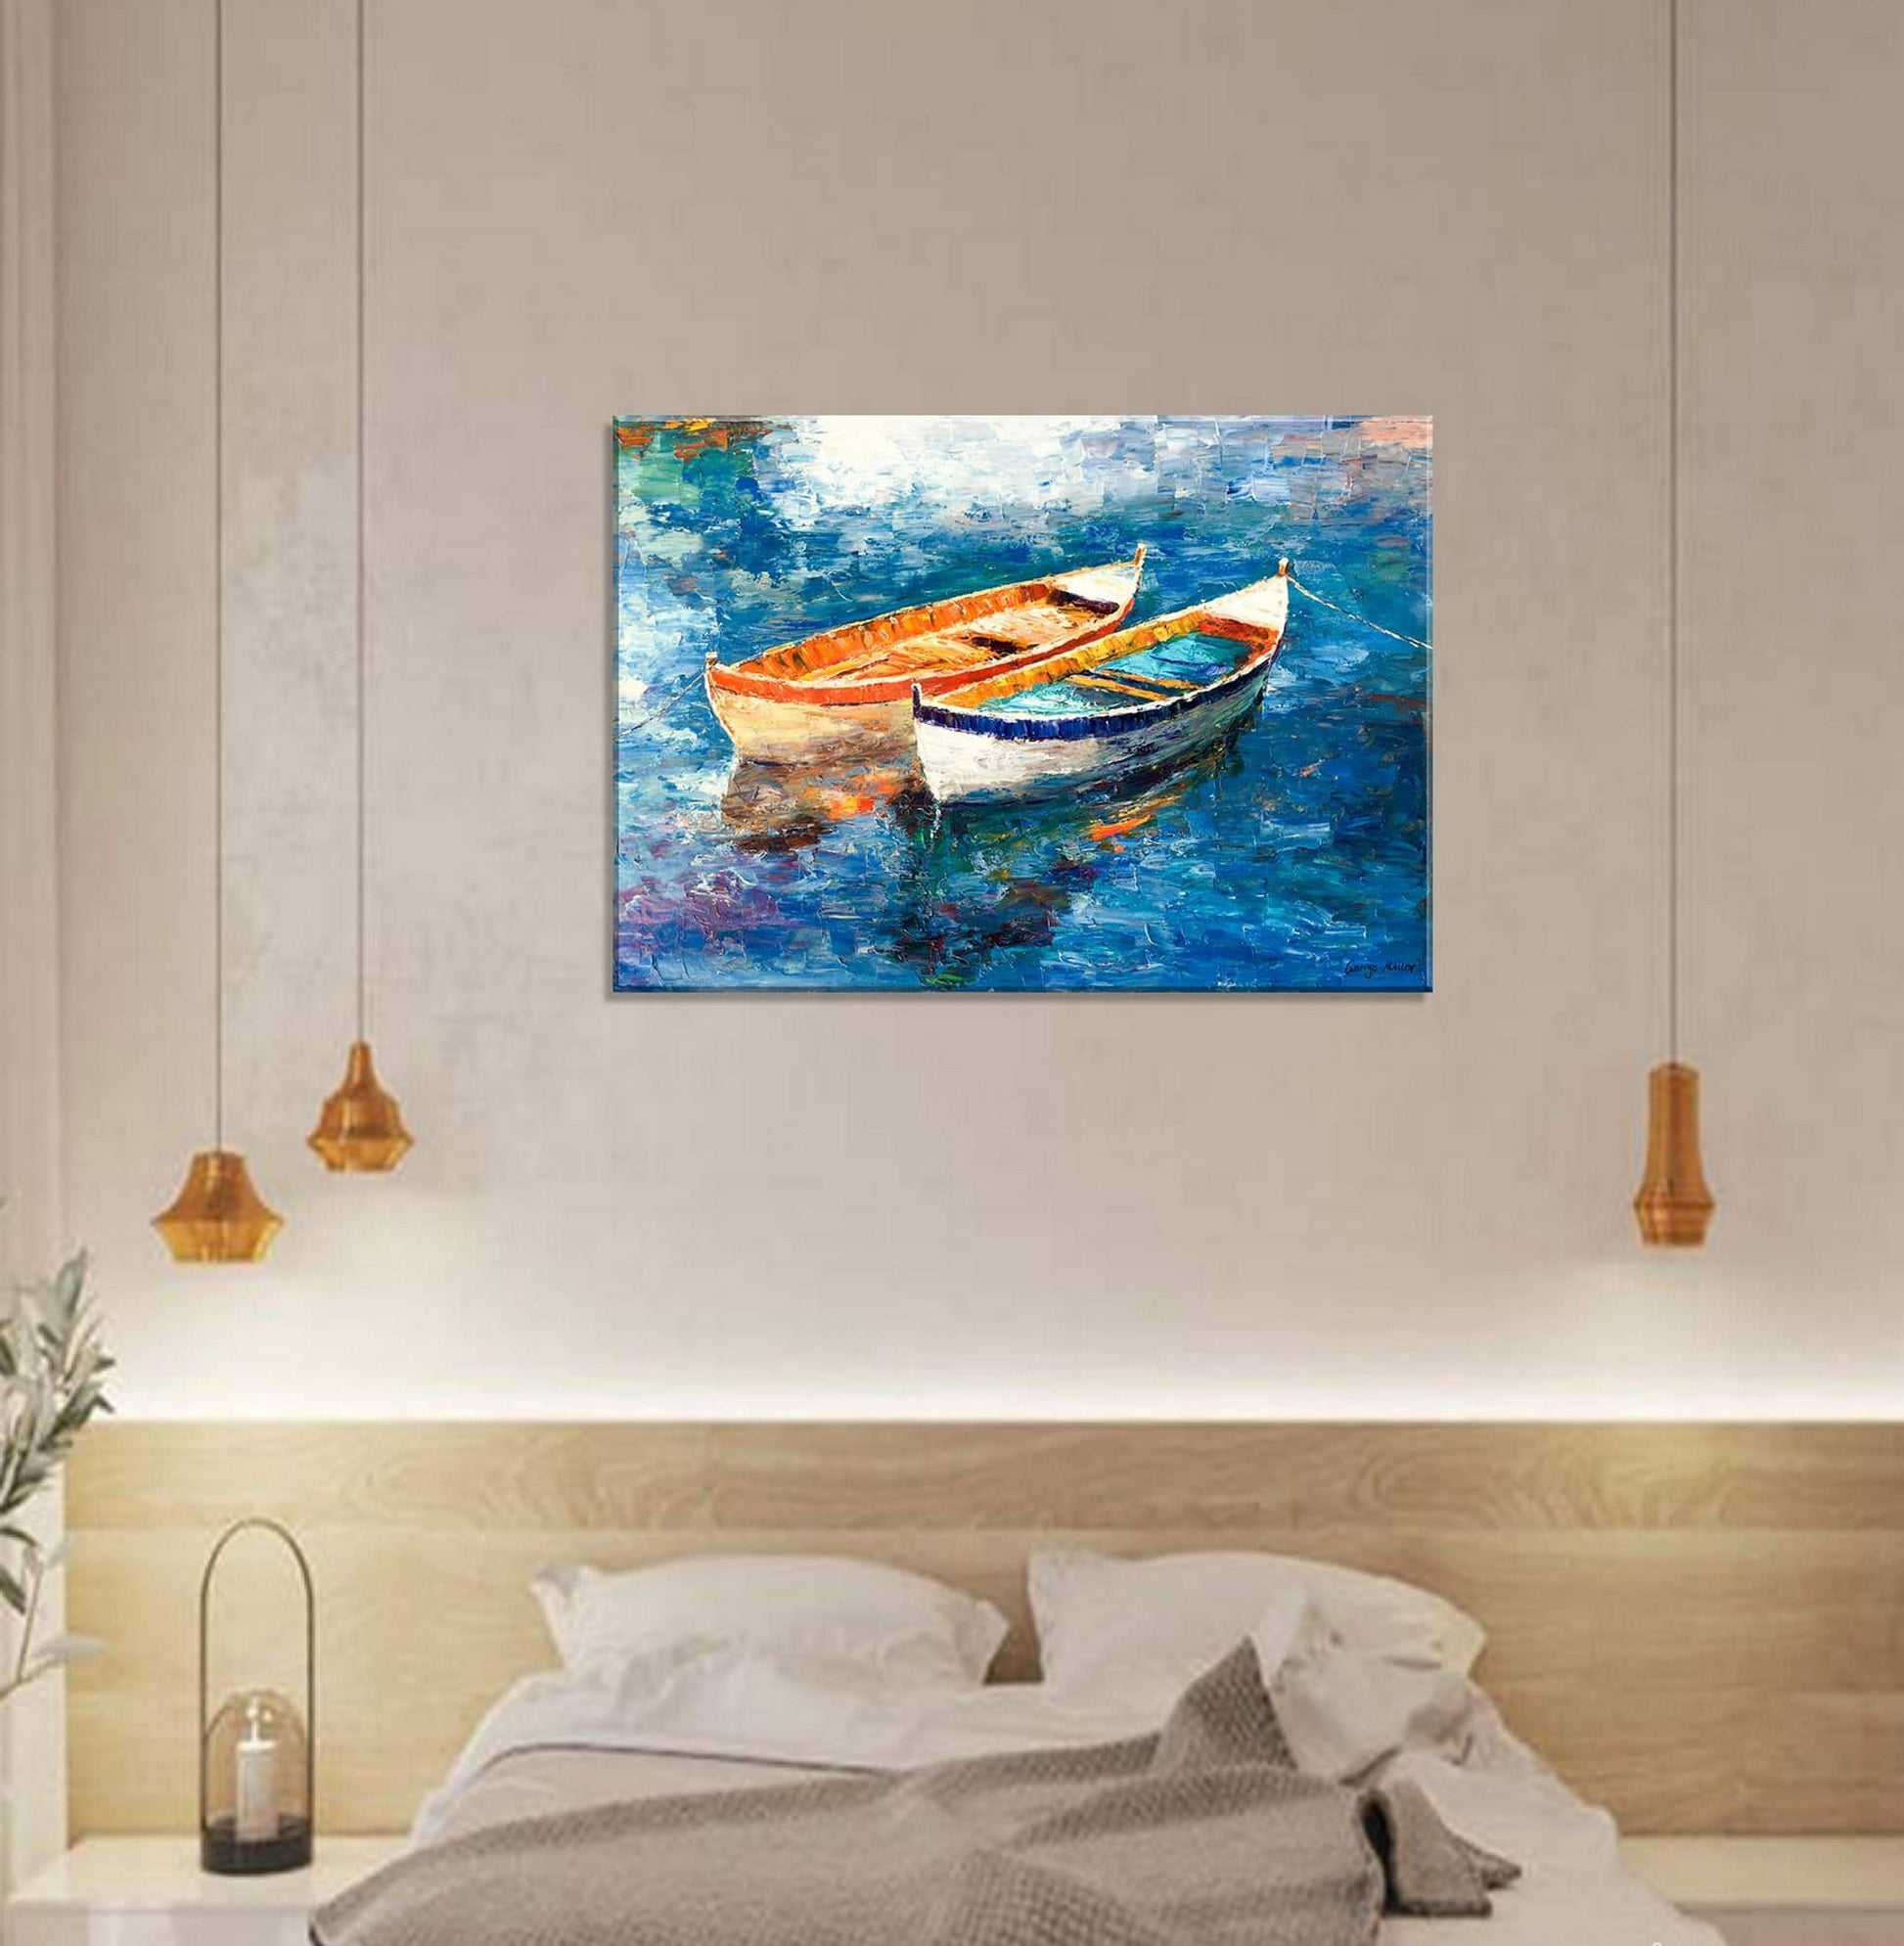 Large Oil Painting Fishing Boats, Living Room Wall Art, Original Oil Painting Seascape, Wall Decor, Original Artwork, Modern Canvas Painting